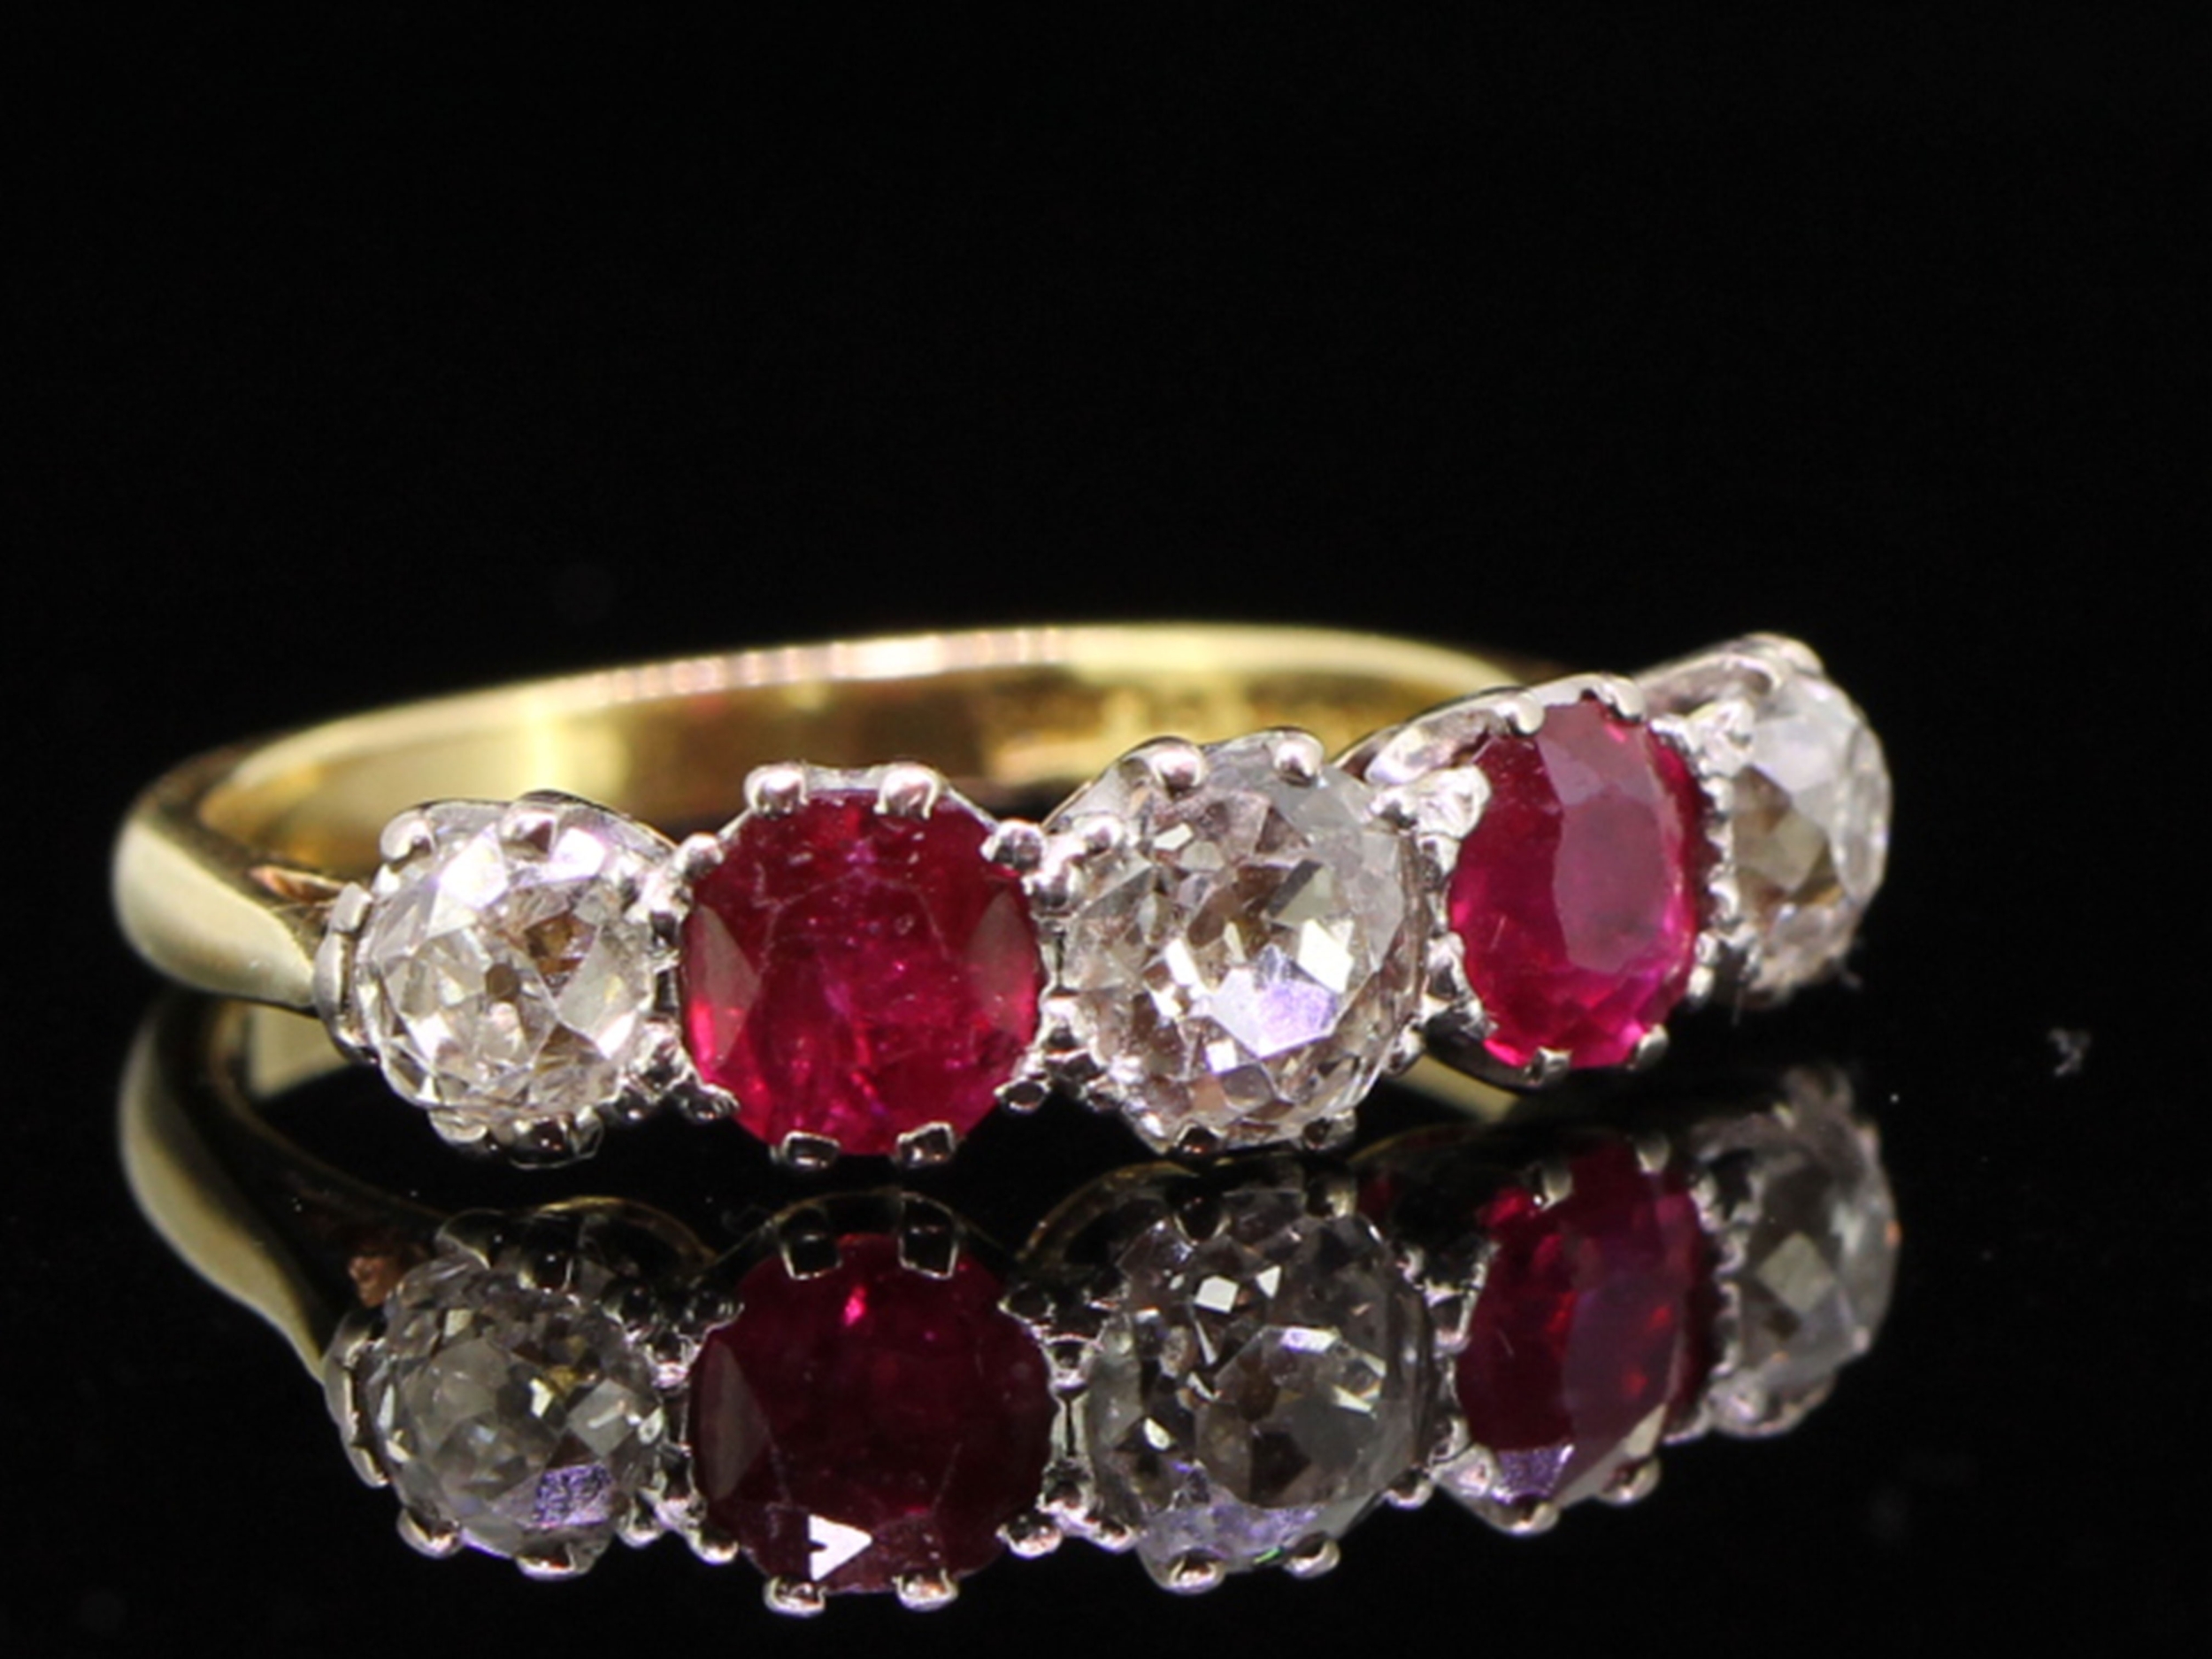 Magnificent edwardian burmese ruby and diamond platinum and gold ring